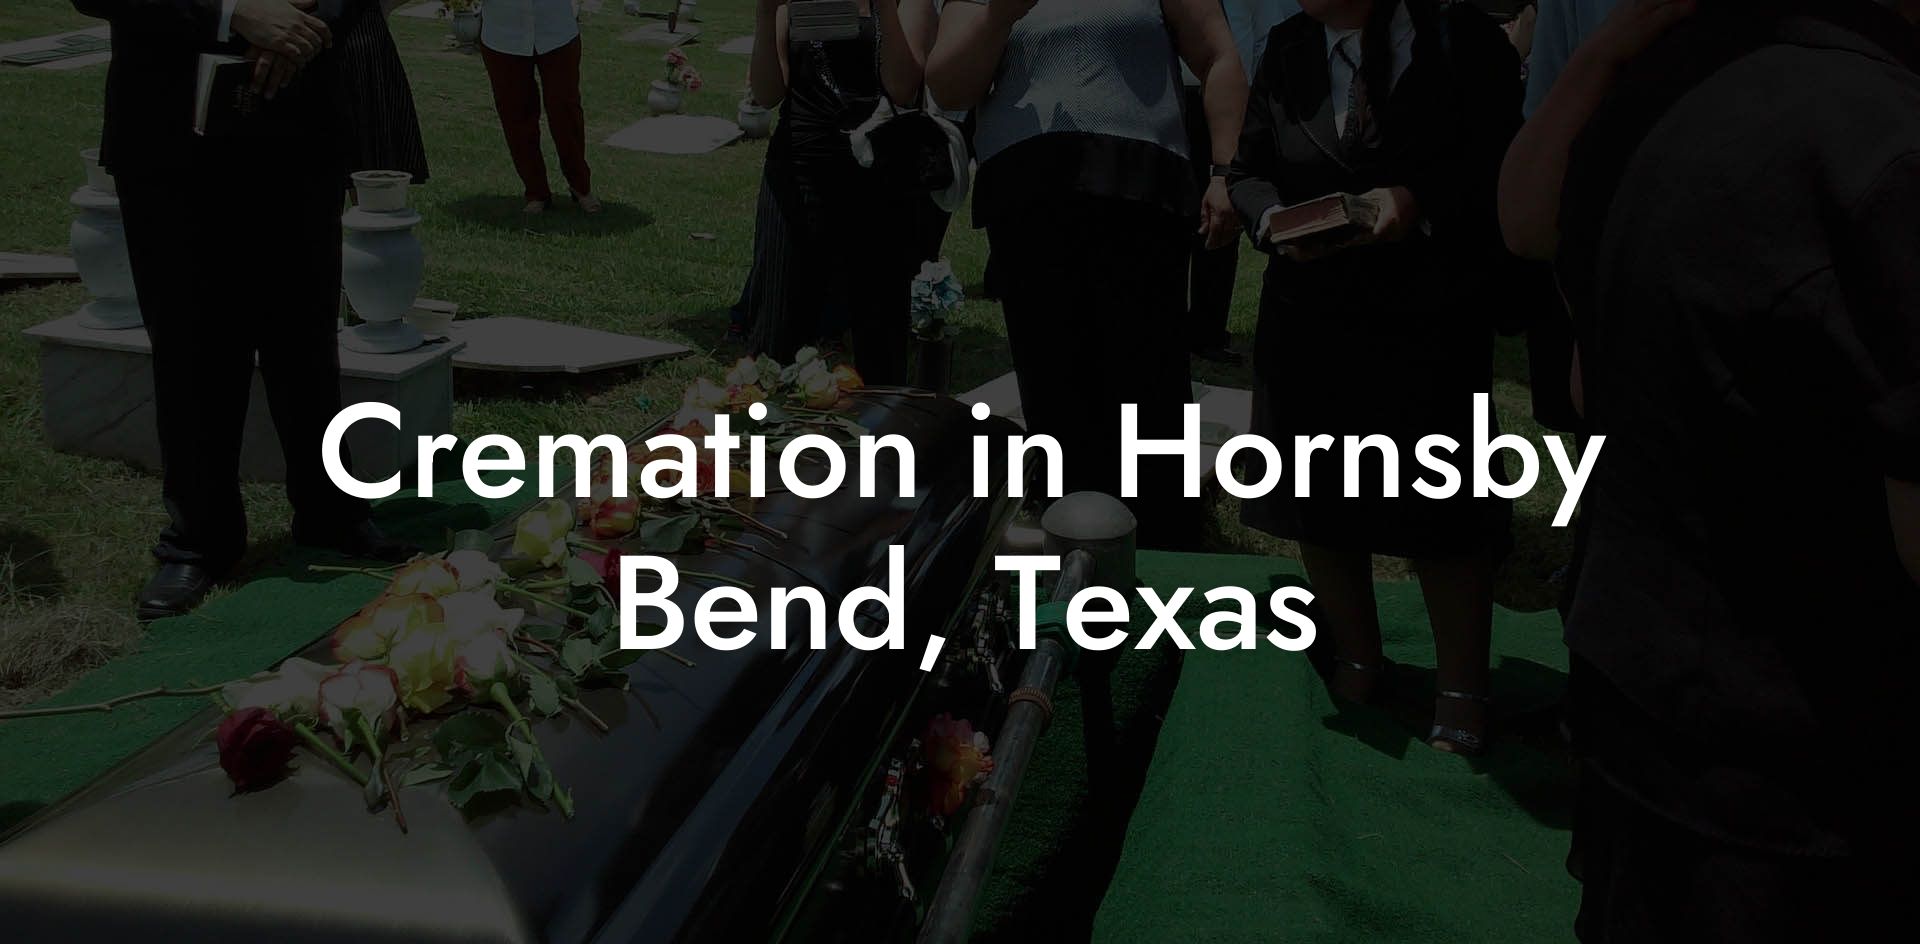 Cremation in Hornsby Bend, Texas